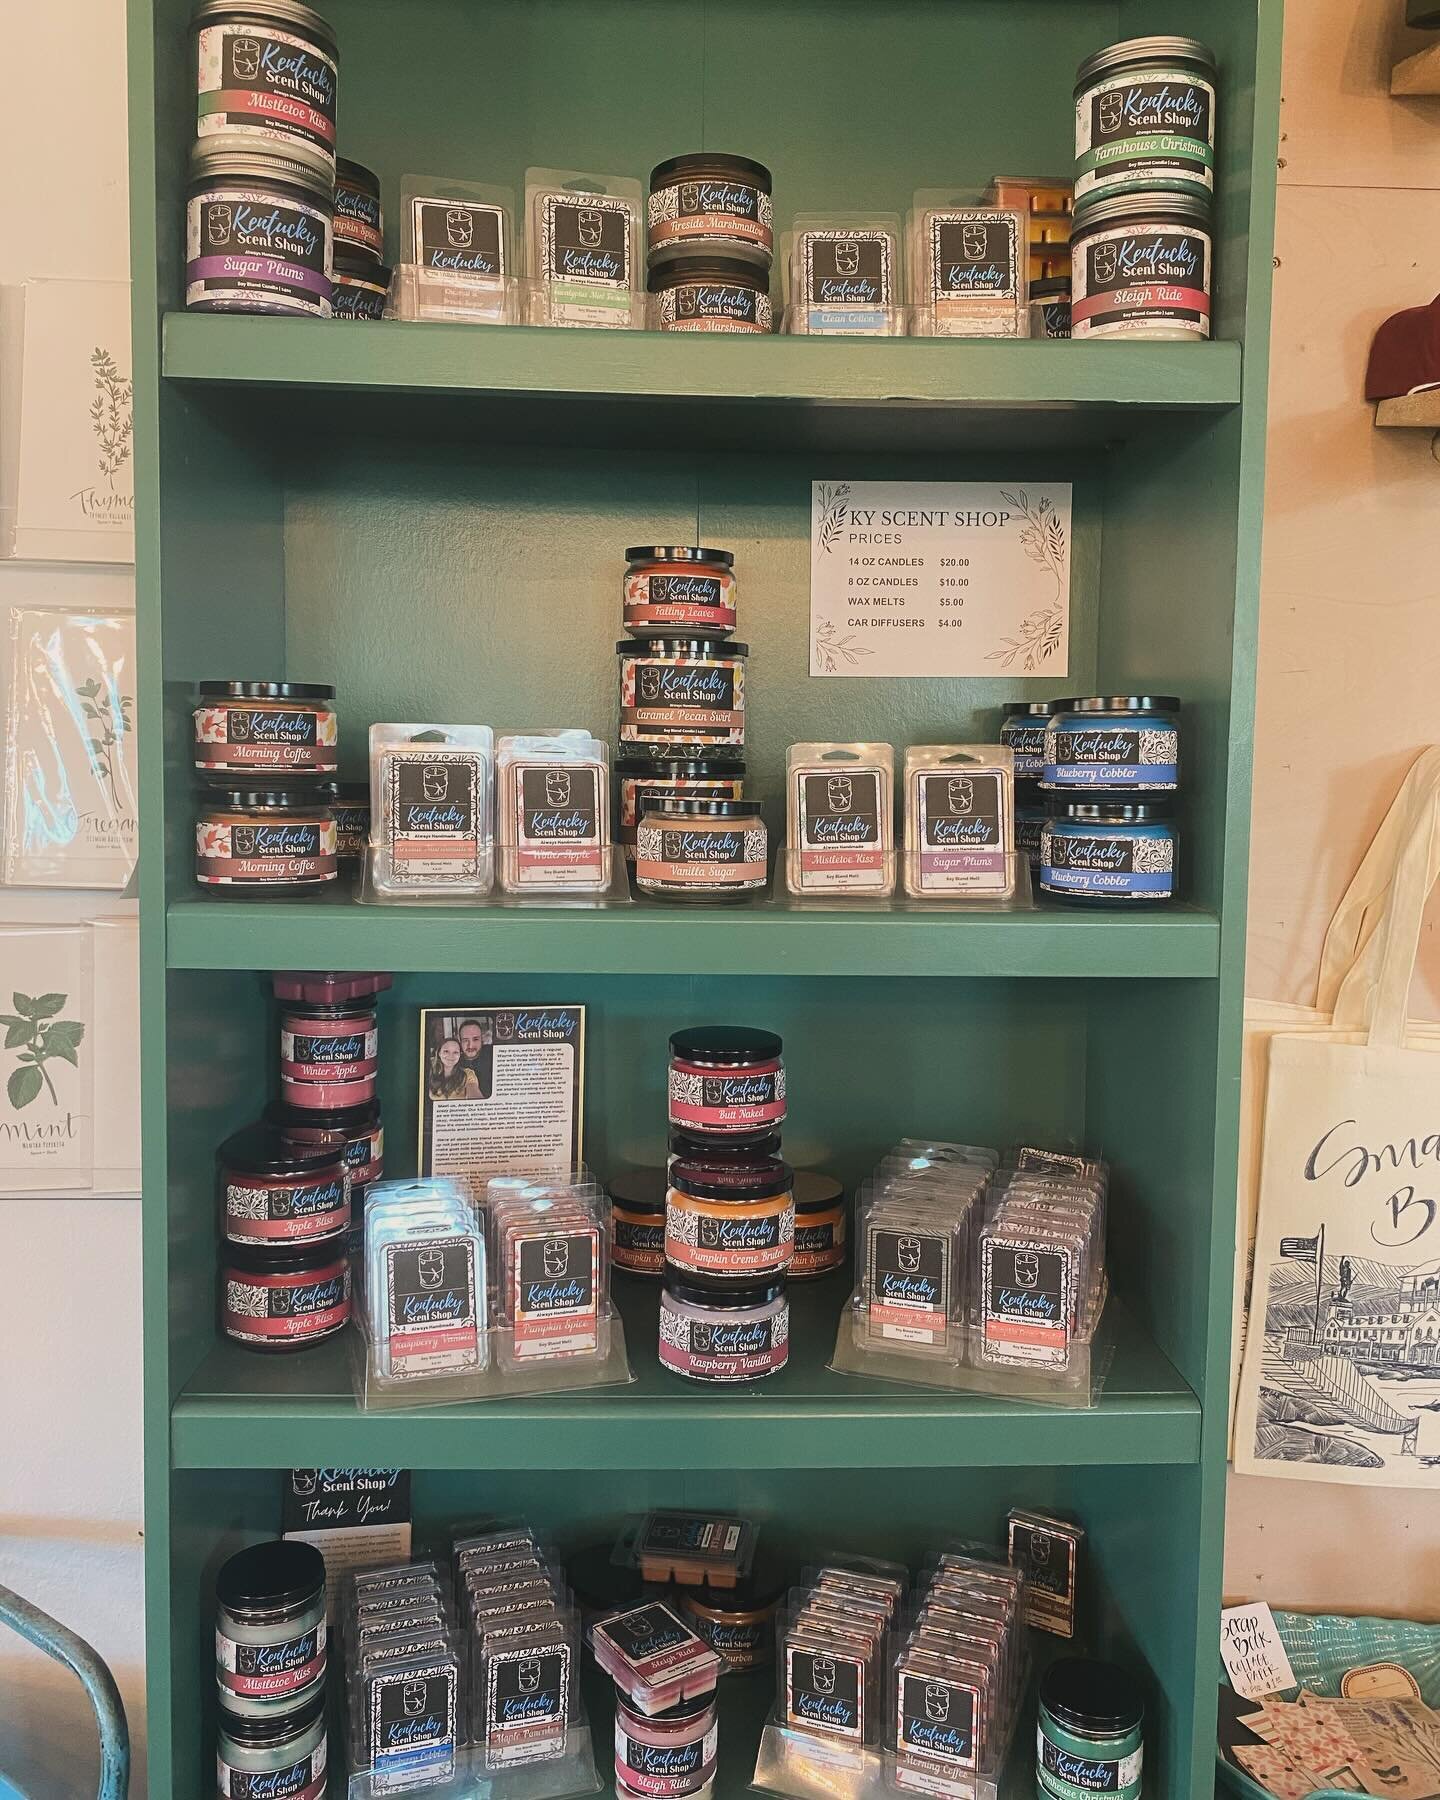 Restock on lots of new things the last few days! 

Lots of @kyscentshop candles and more car diffusers! 
@sweetmamacreation throw pillows, 
@wildflowermarketky soaps, scrubs, and body butter. 
@farmtohomecandleco candles and melts, 
@essentiallycraft